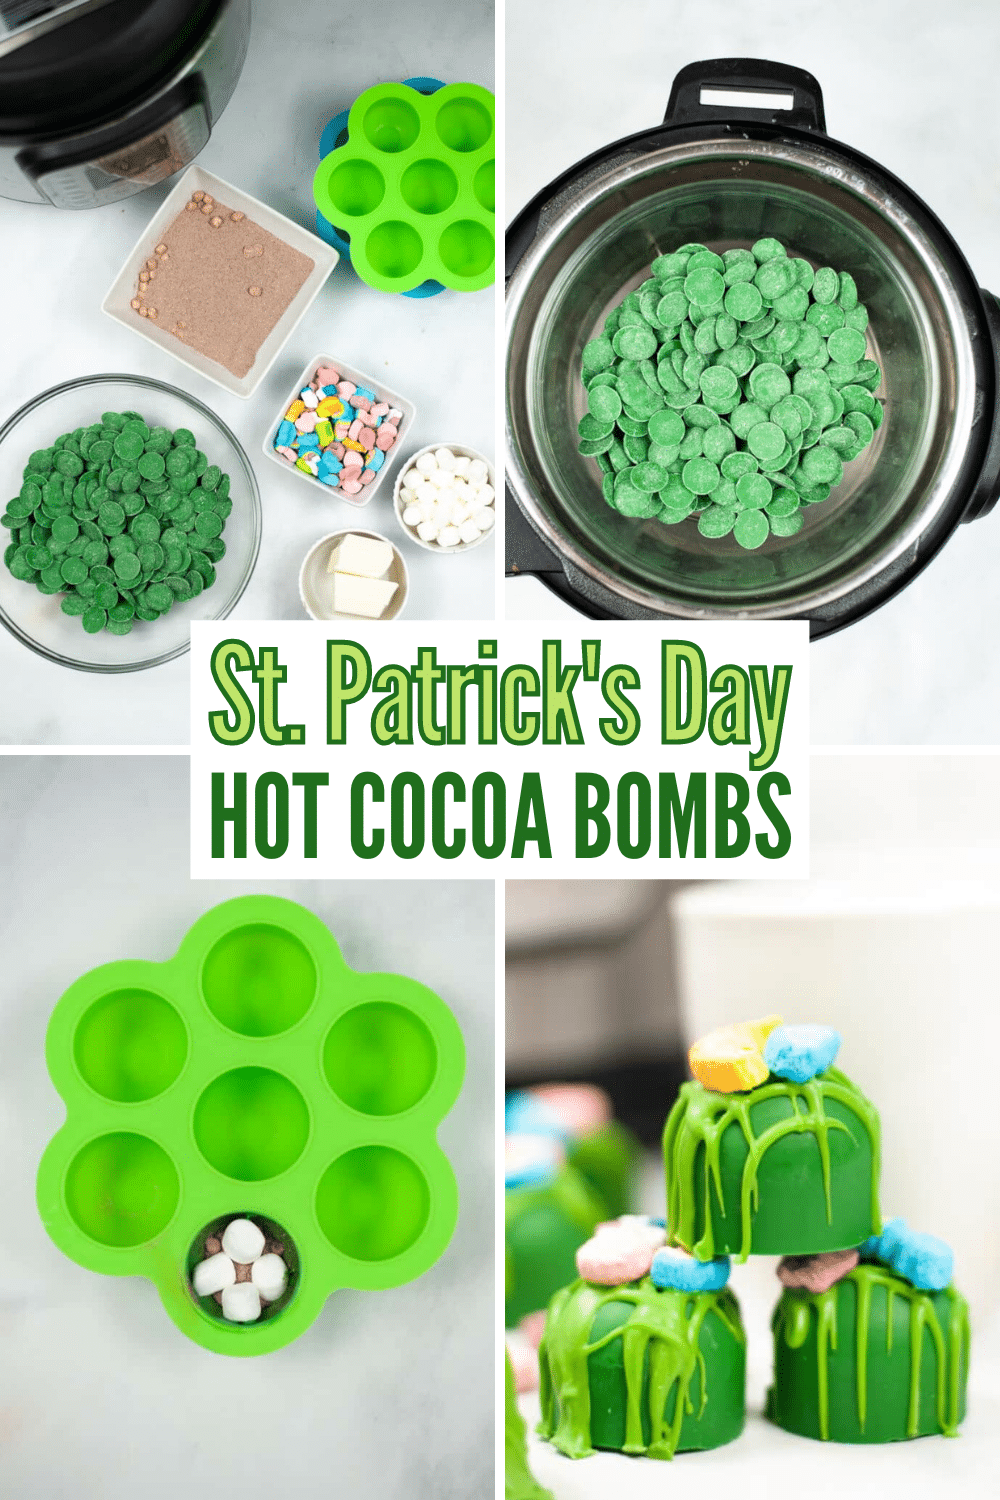 These Instant Pot St. Patrick’s Day Hot Cocoa Bombs are about to make you forget about "luck" and turn your dreams into a reality! #stpatricksday #hotcocoabombs #hotcocoa #hotchocolate via @wondermomwannab